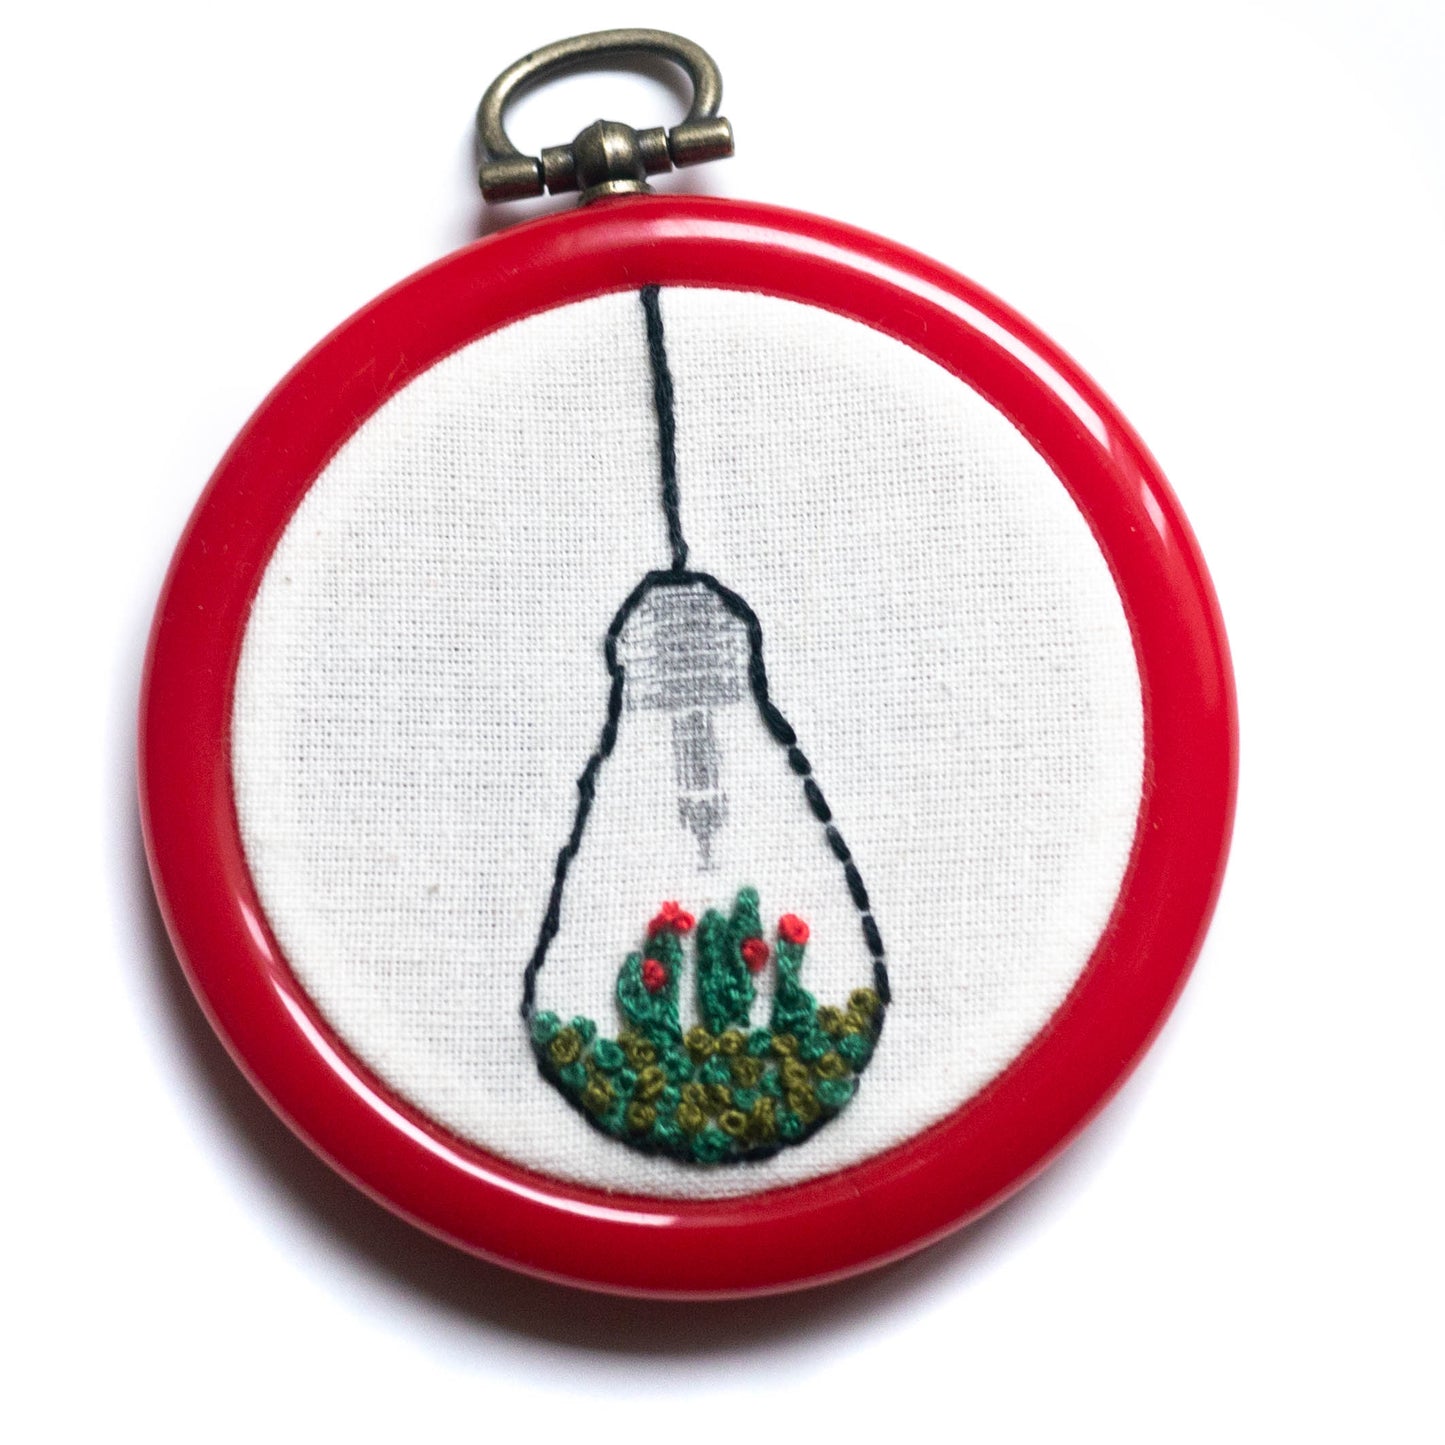 4" Hoop Embroidery Kit with 3" Hanging Frame